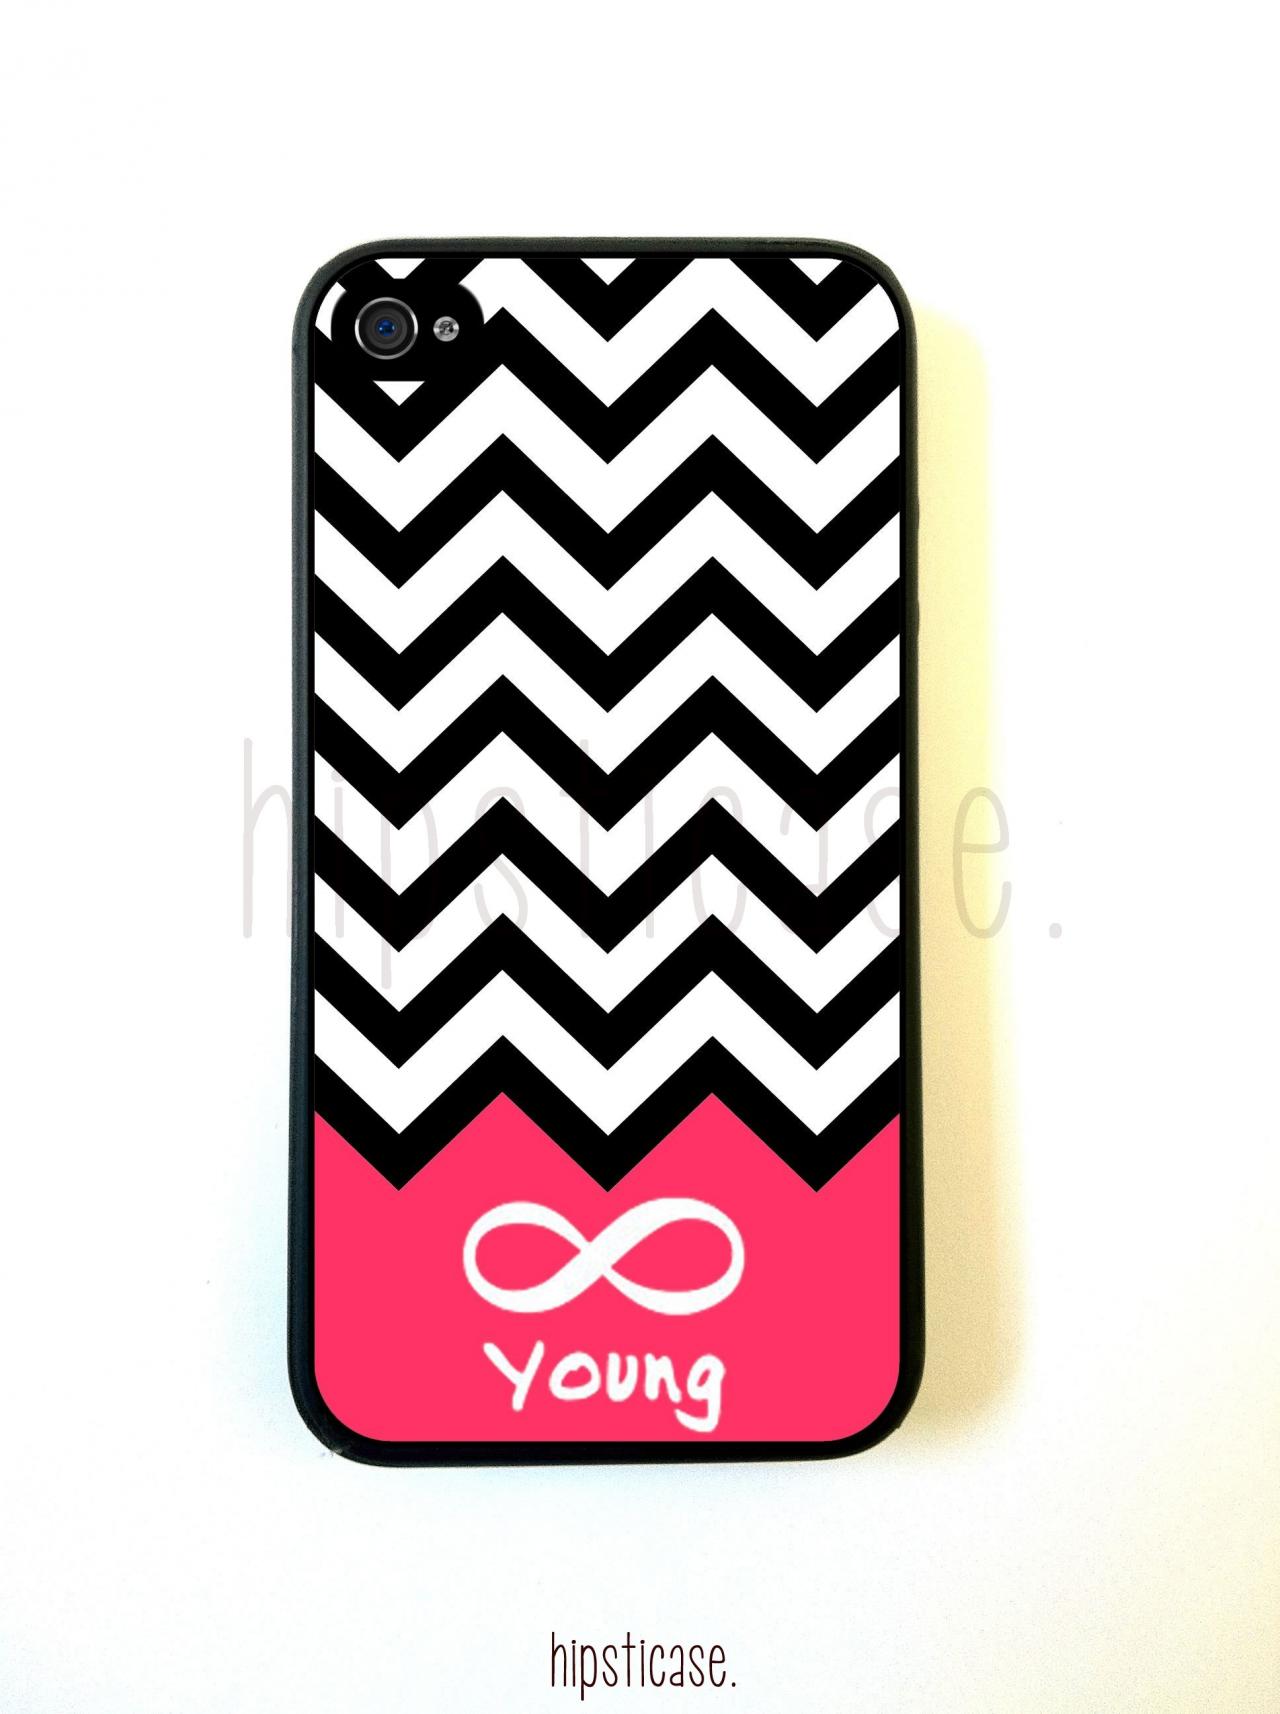 Forever Young Chevron Iphone 5 Case - For Iphone 5/5g - Designer Tpu Case Verizon At&t Sprint